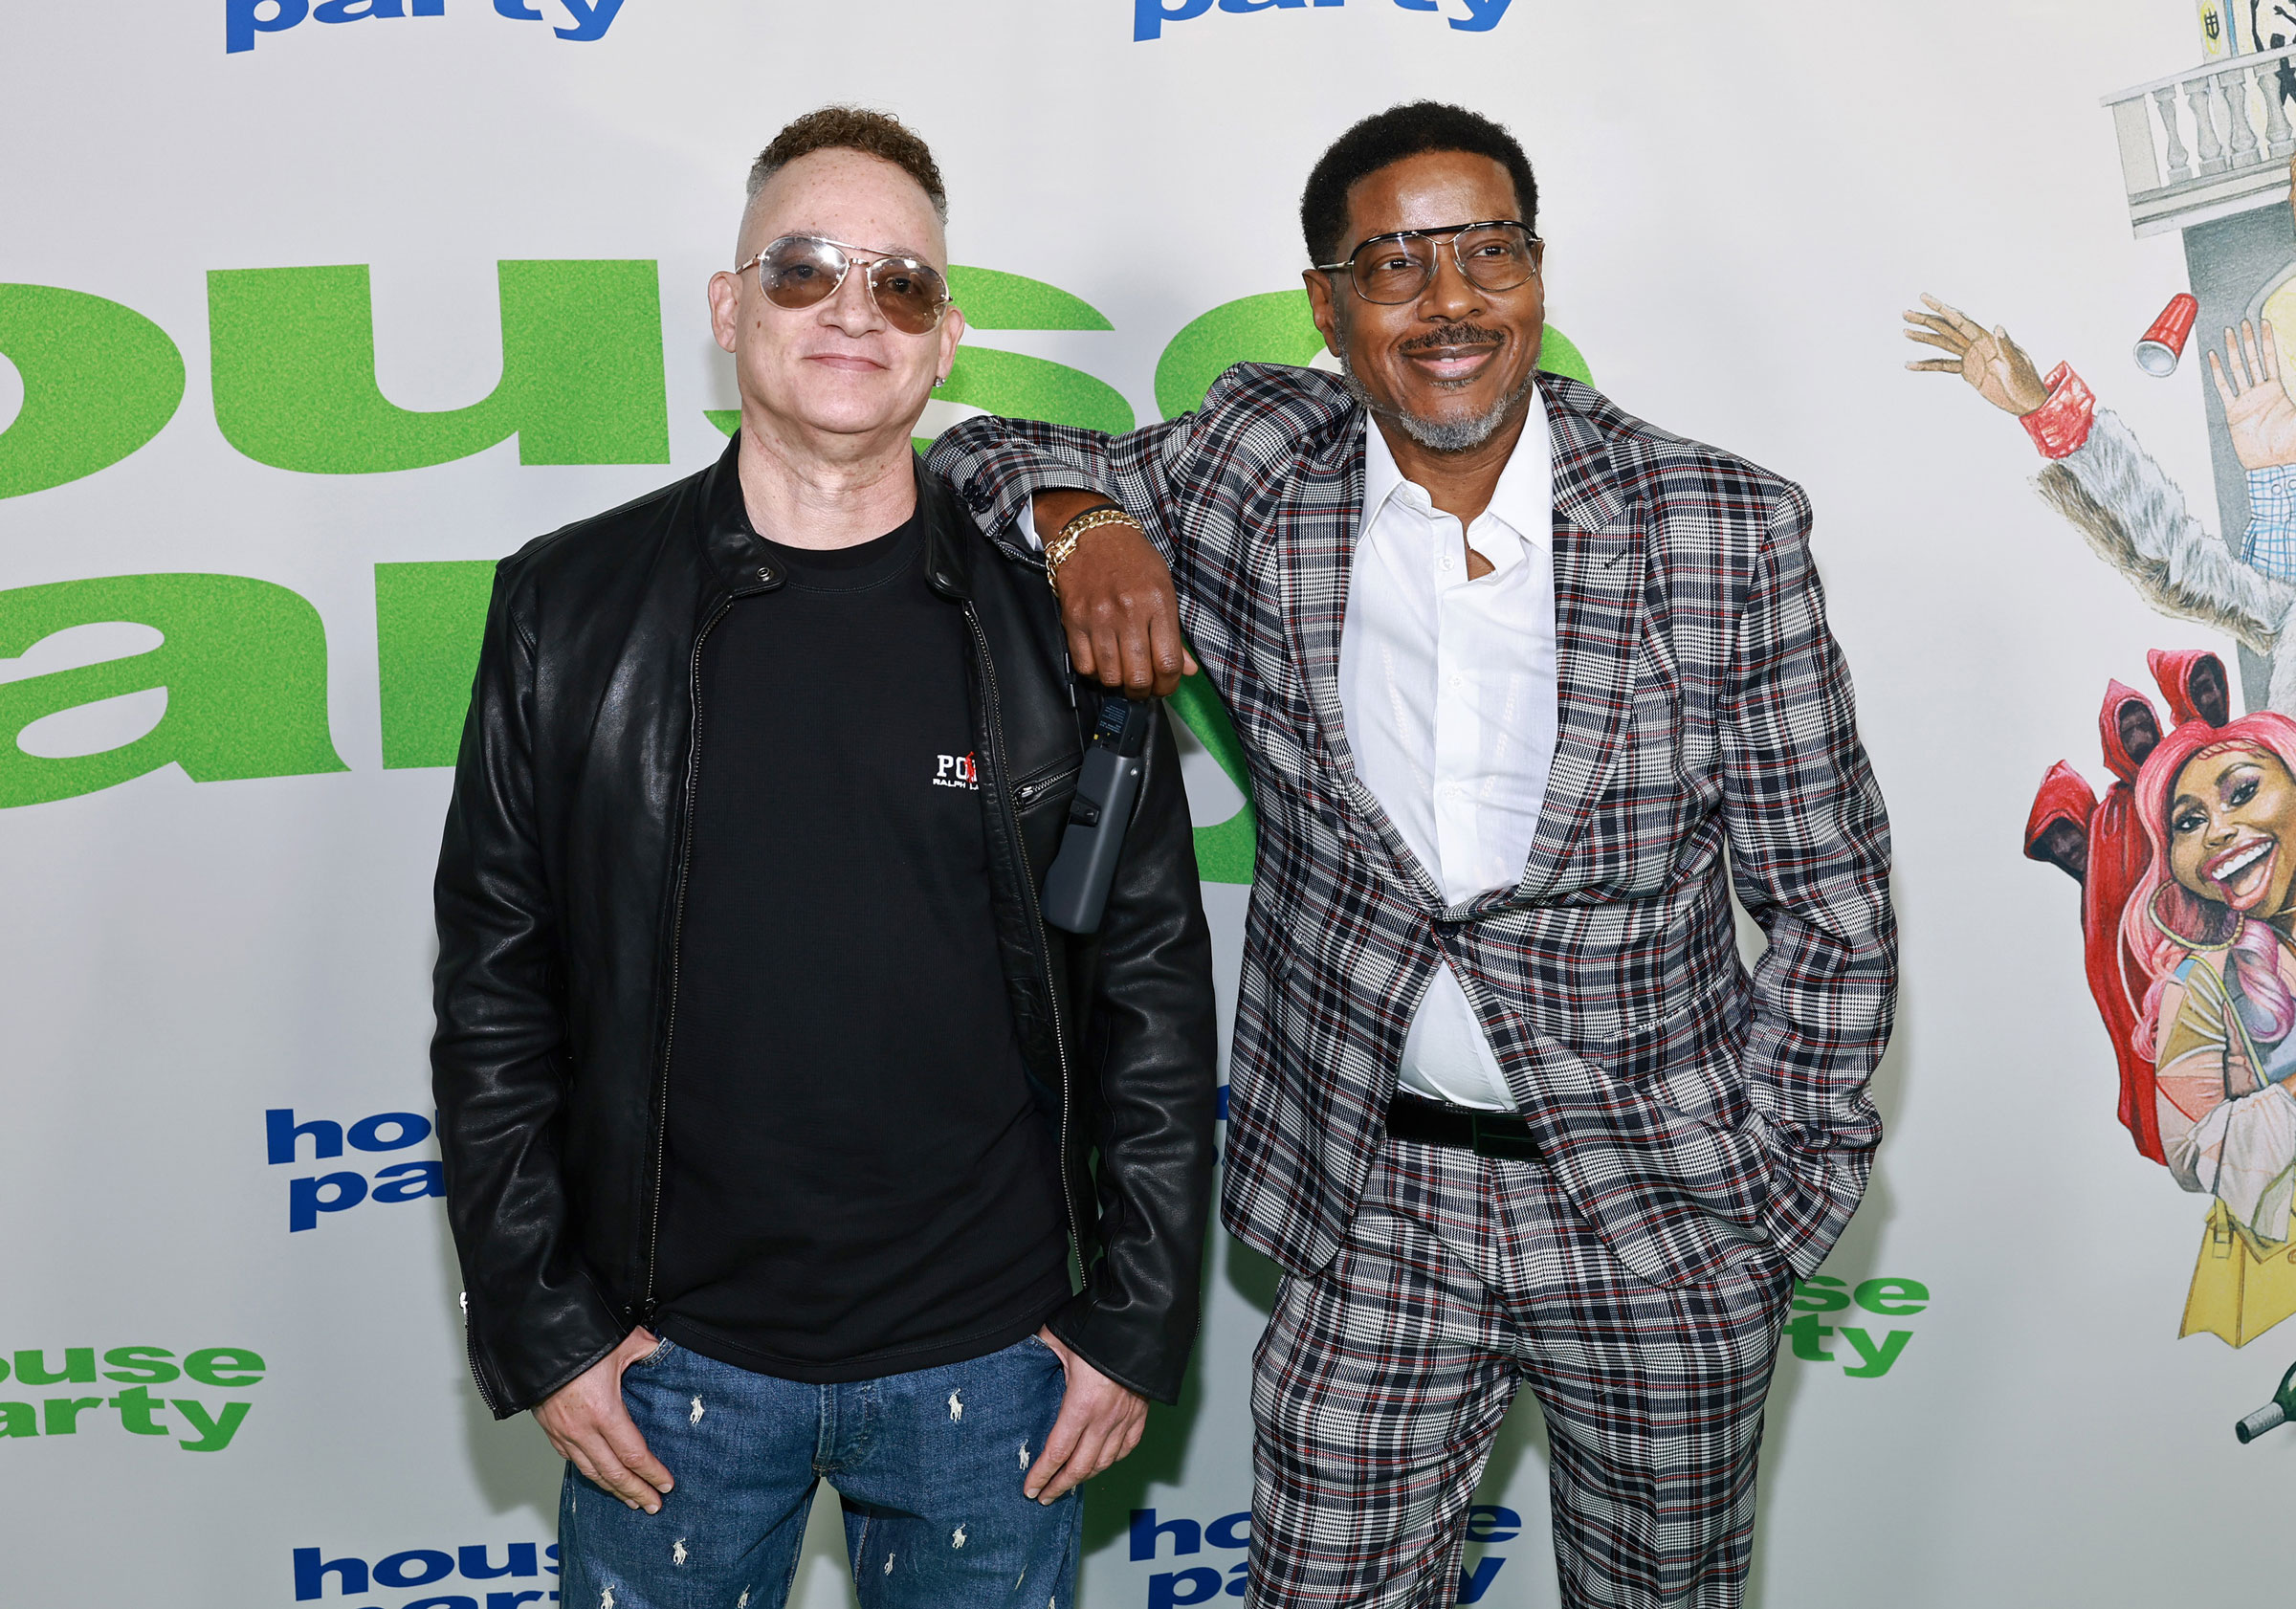 HOLLYWOOD, CALIFORNIA - JANUARY 11: (L-R) Christopher Reid Christopher Martin of Kid 'n Play attend the Special Red Carpet Screening for New Line Cinema's "House Party" at TCL Chinese 6 Theatres on January 11, 2023 in Hollywood, California. (Photo by Matt Winkelmeyer/Getty Images) (Getty Images—2023 Getty Images)